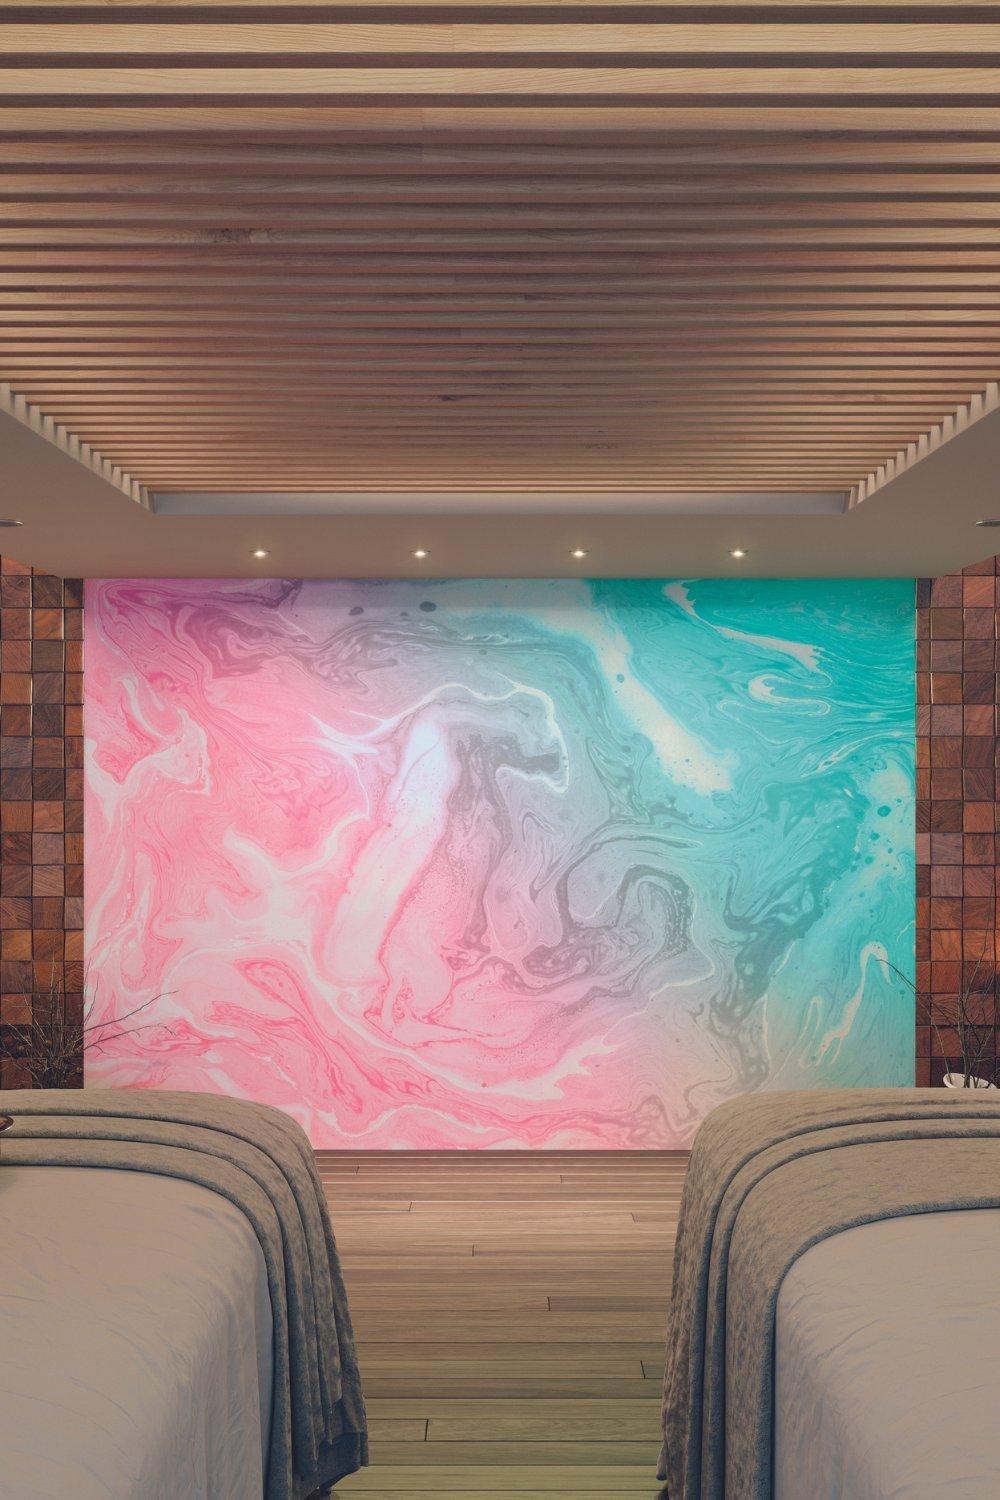 Flowing Marble Pink Matt Smooth Paste the Wall Mural 350cm wide x 280cm high